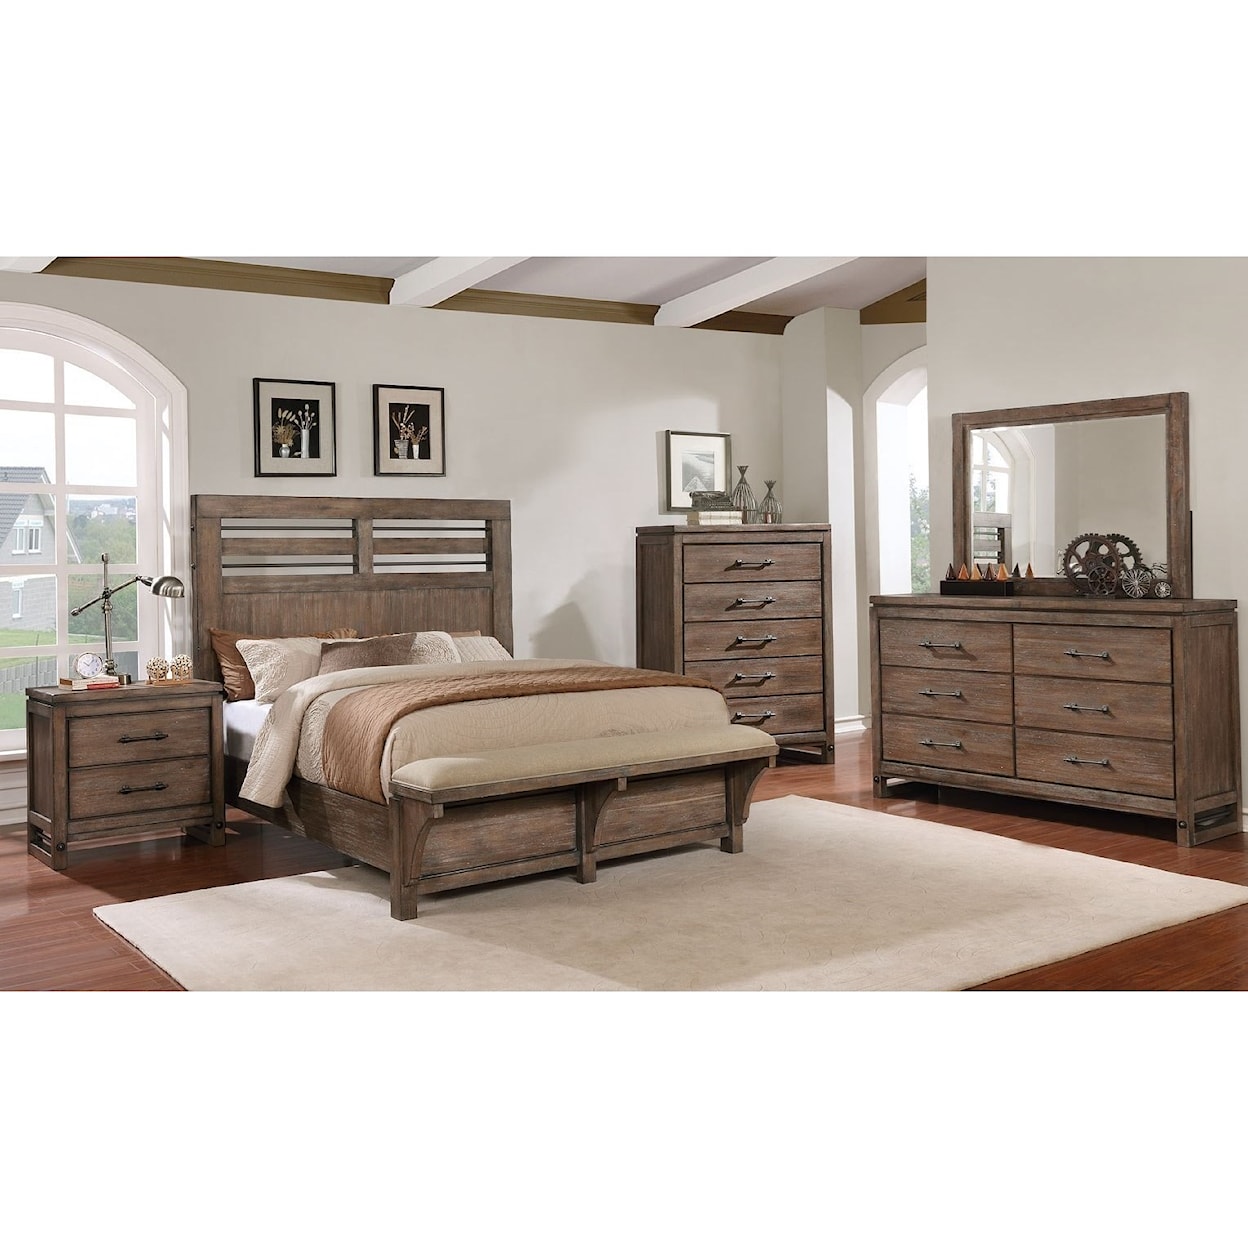 Avalon Furniture Round Rock Chest of Drawers